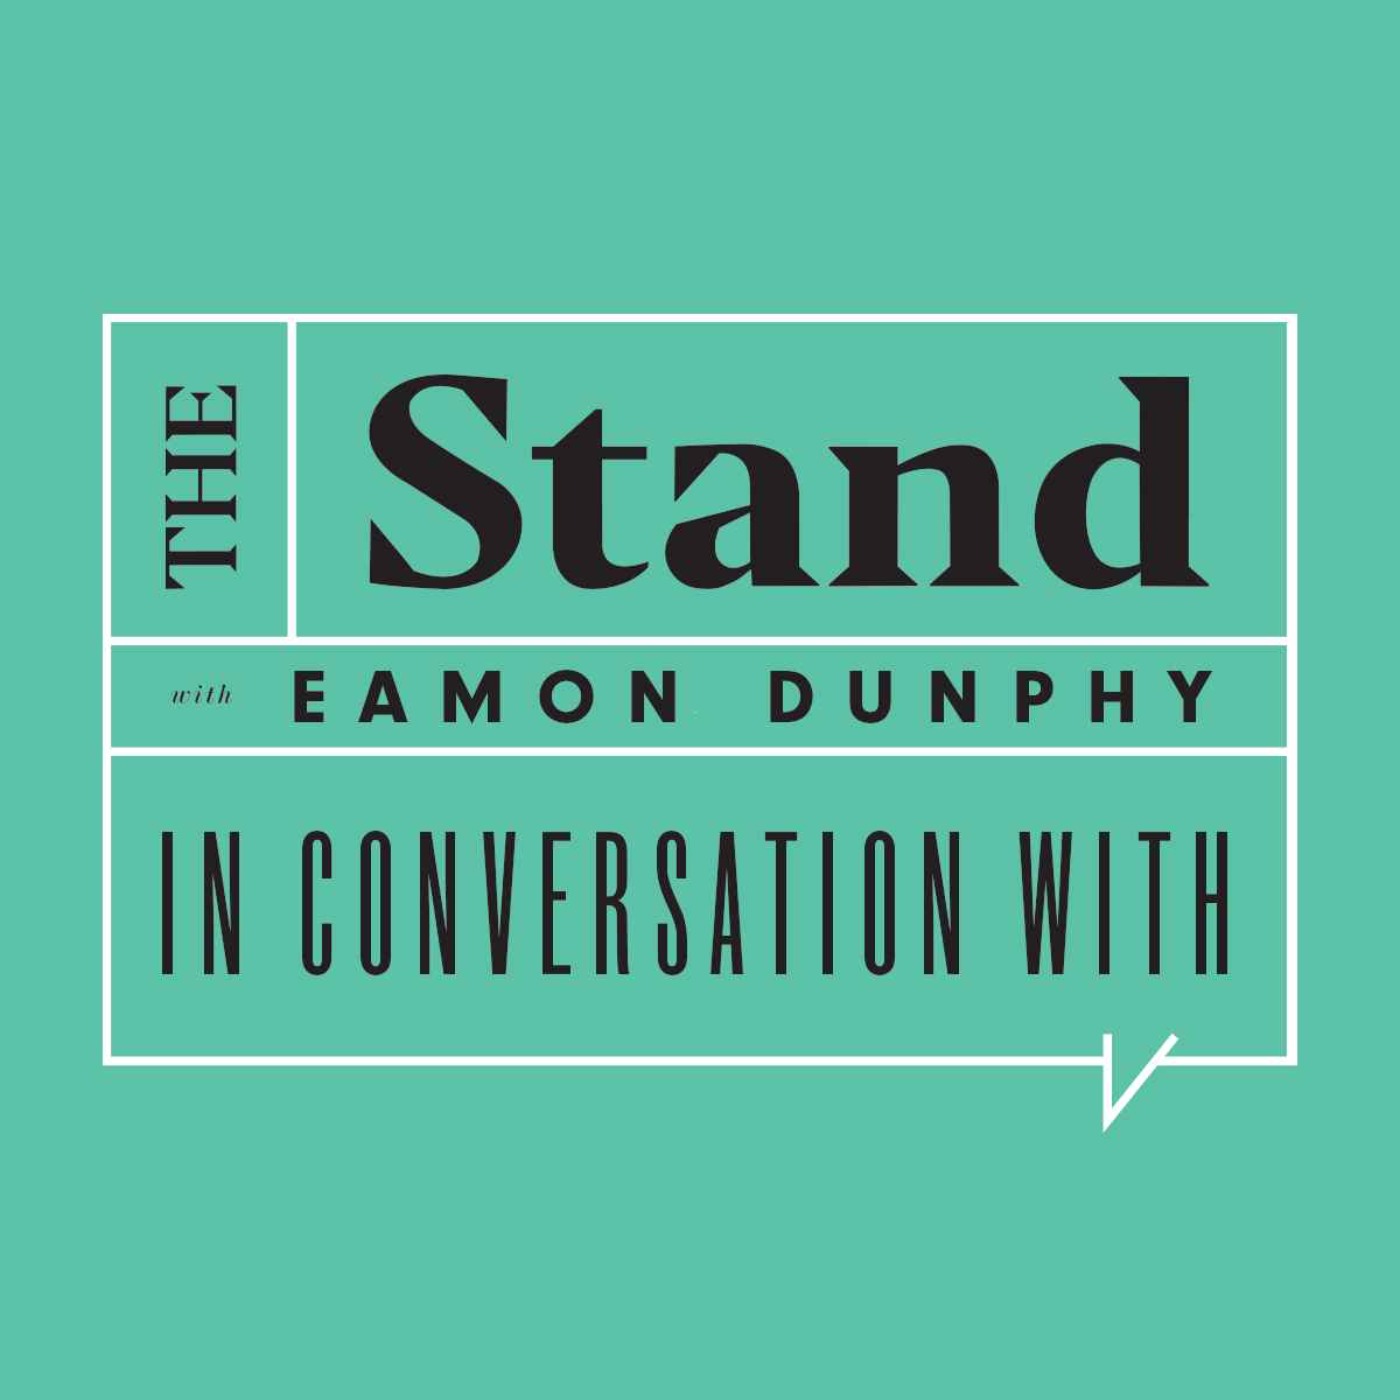 Ep 1970: America’s direction of economic travel bad news for Ireland  and the European Union